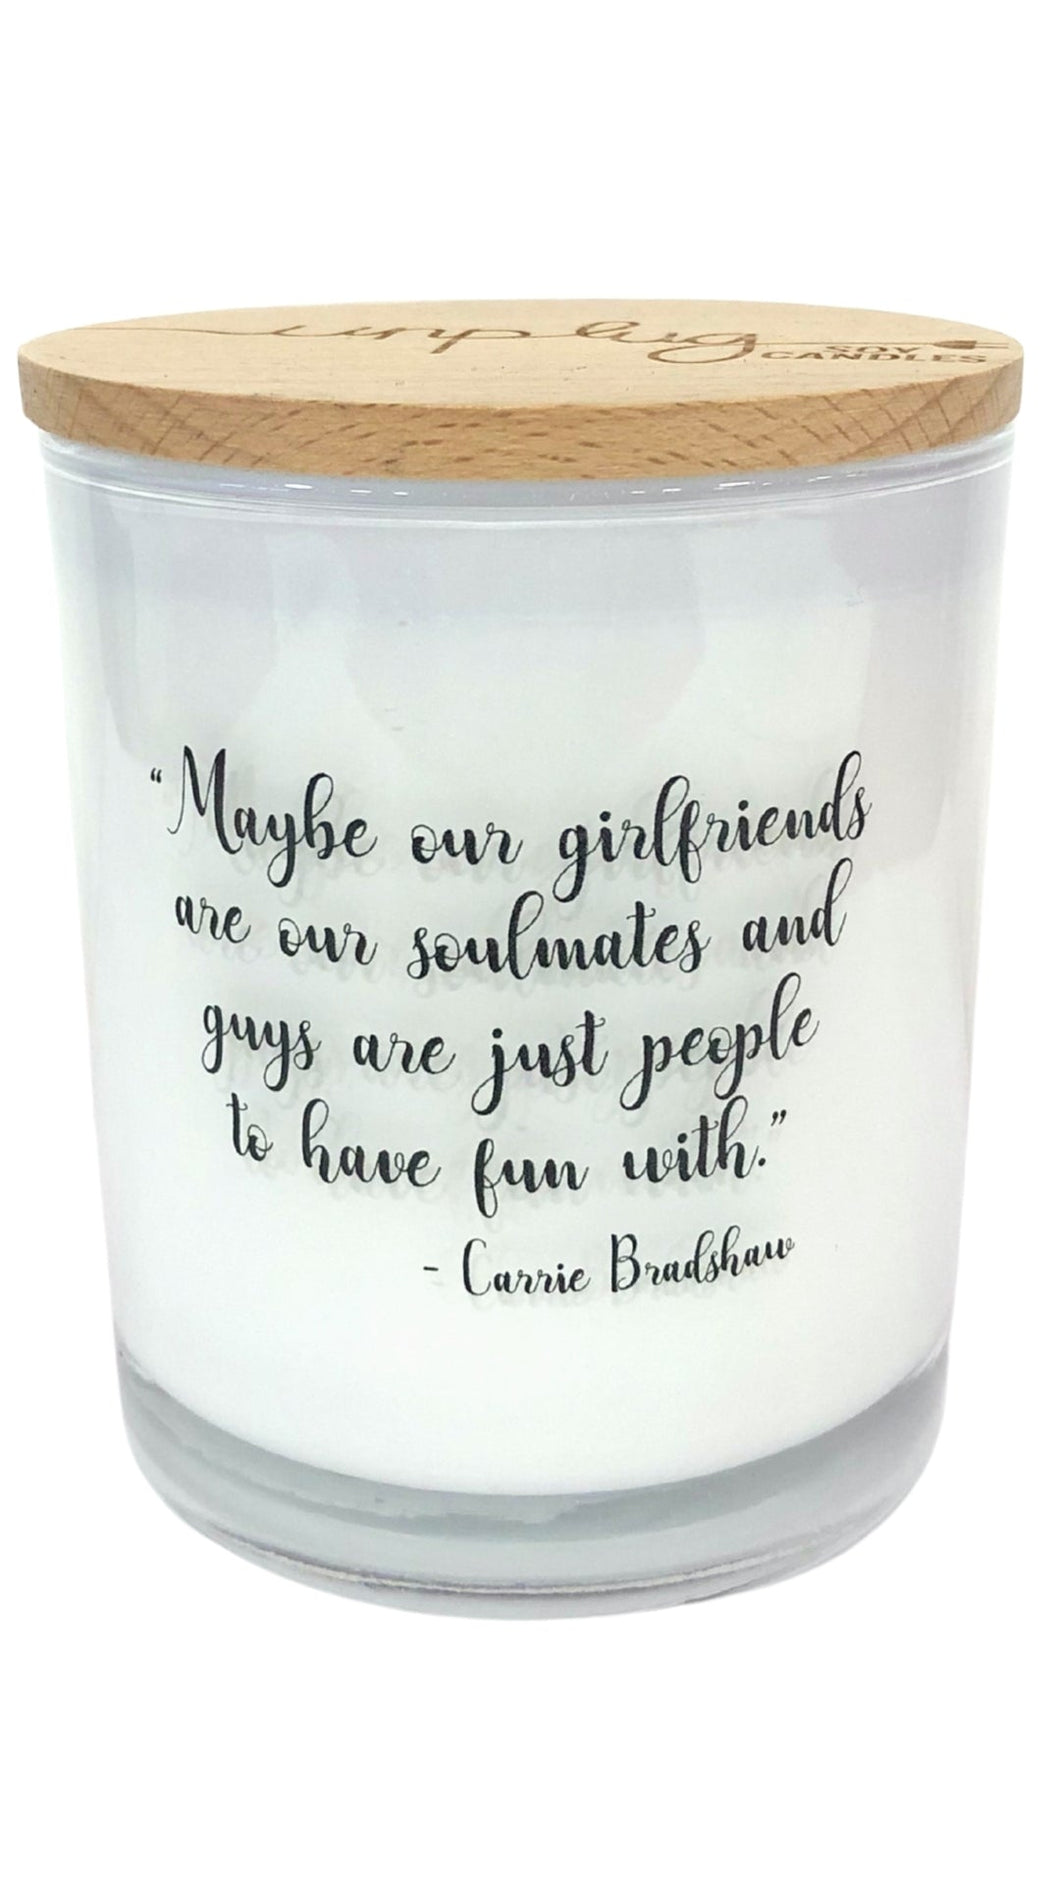 Carrie Bradshaw Quote Candle